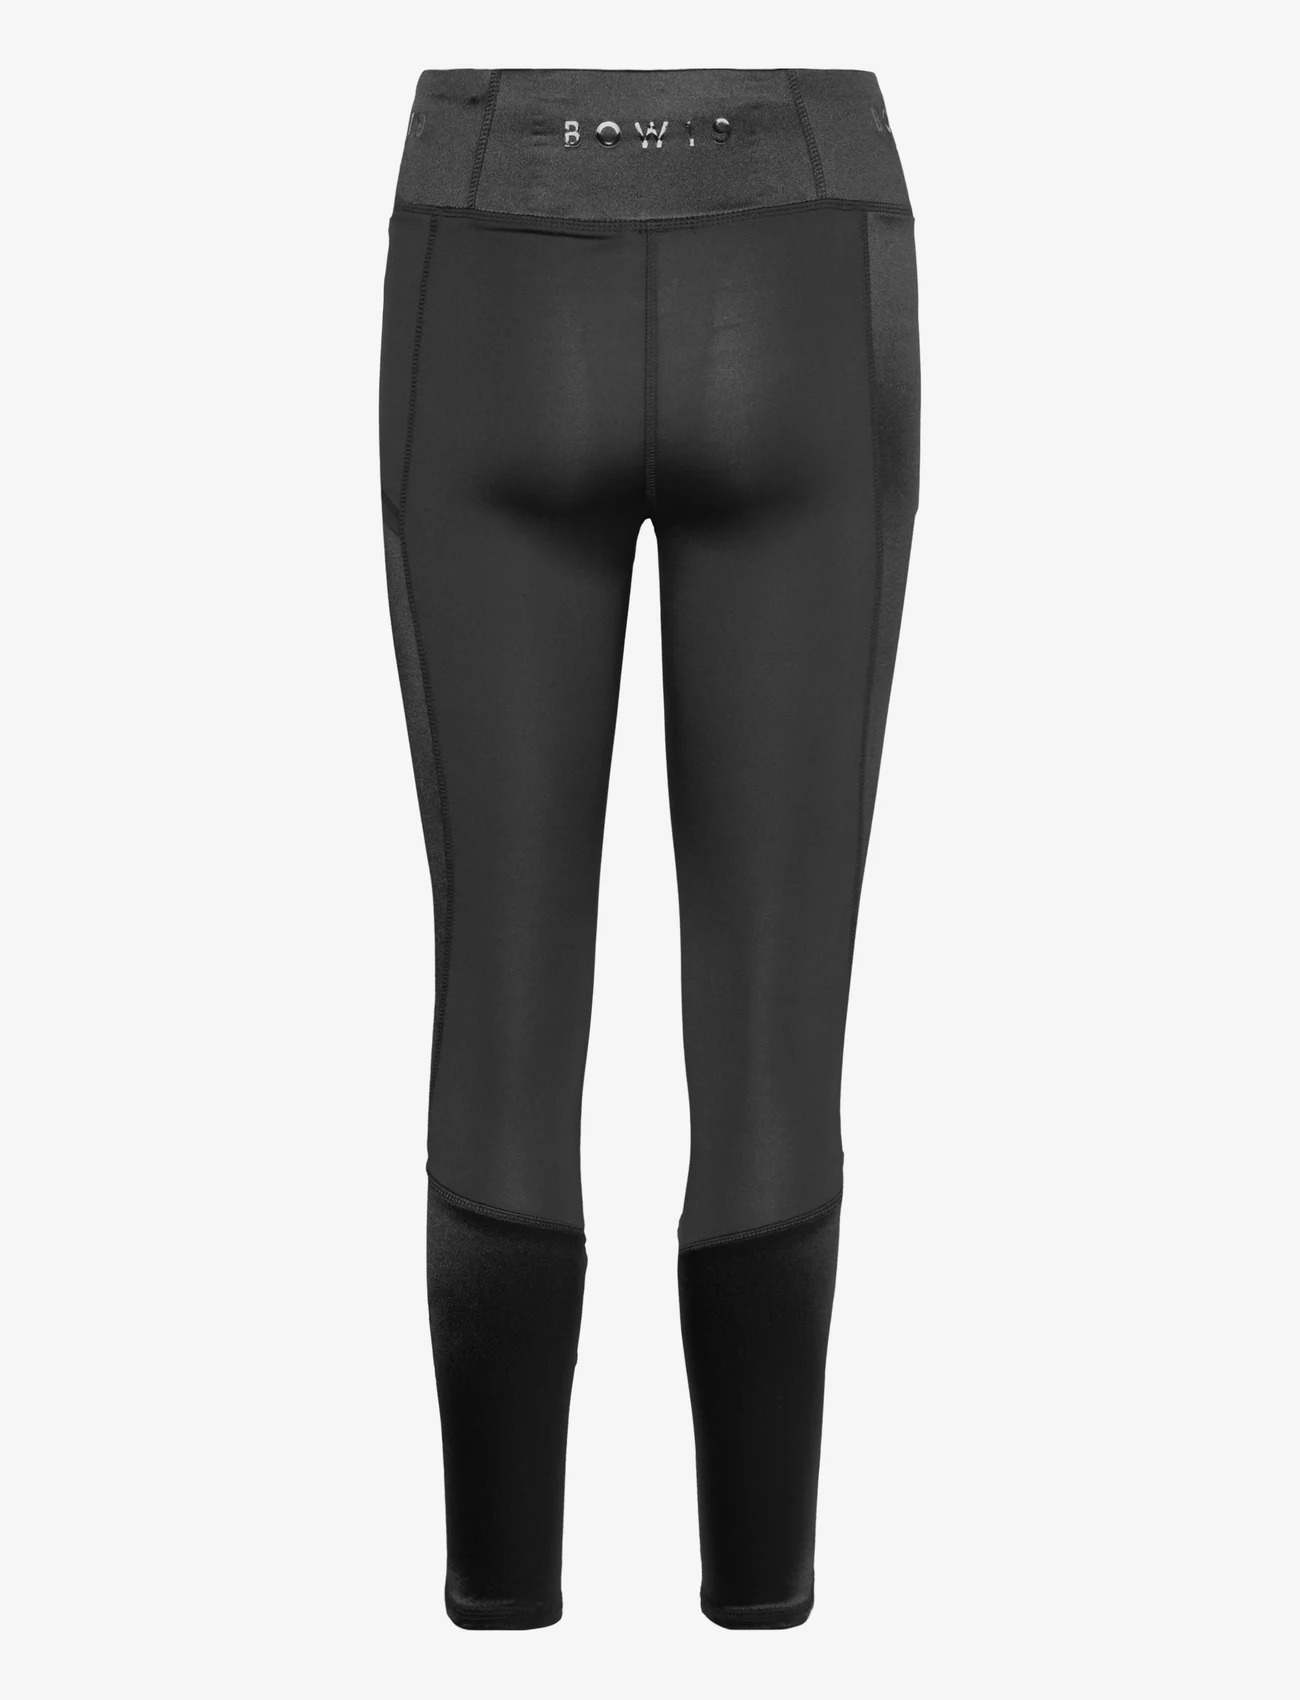 BOW19 - Angie tights - sportleggings - black - 1